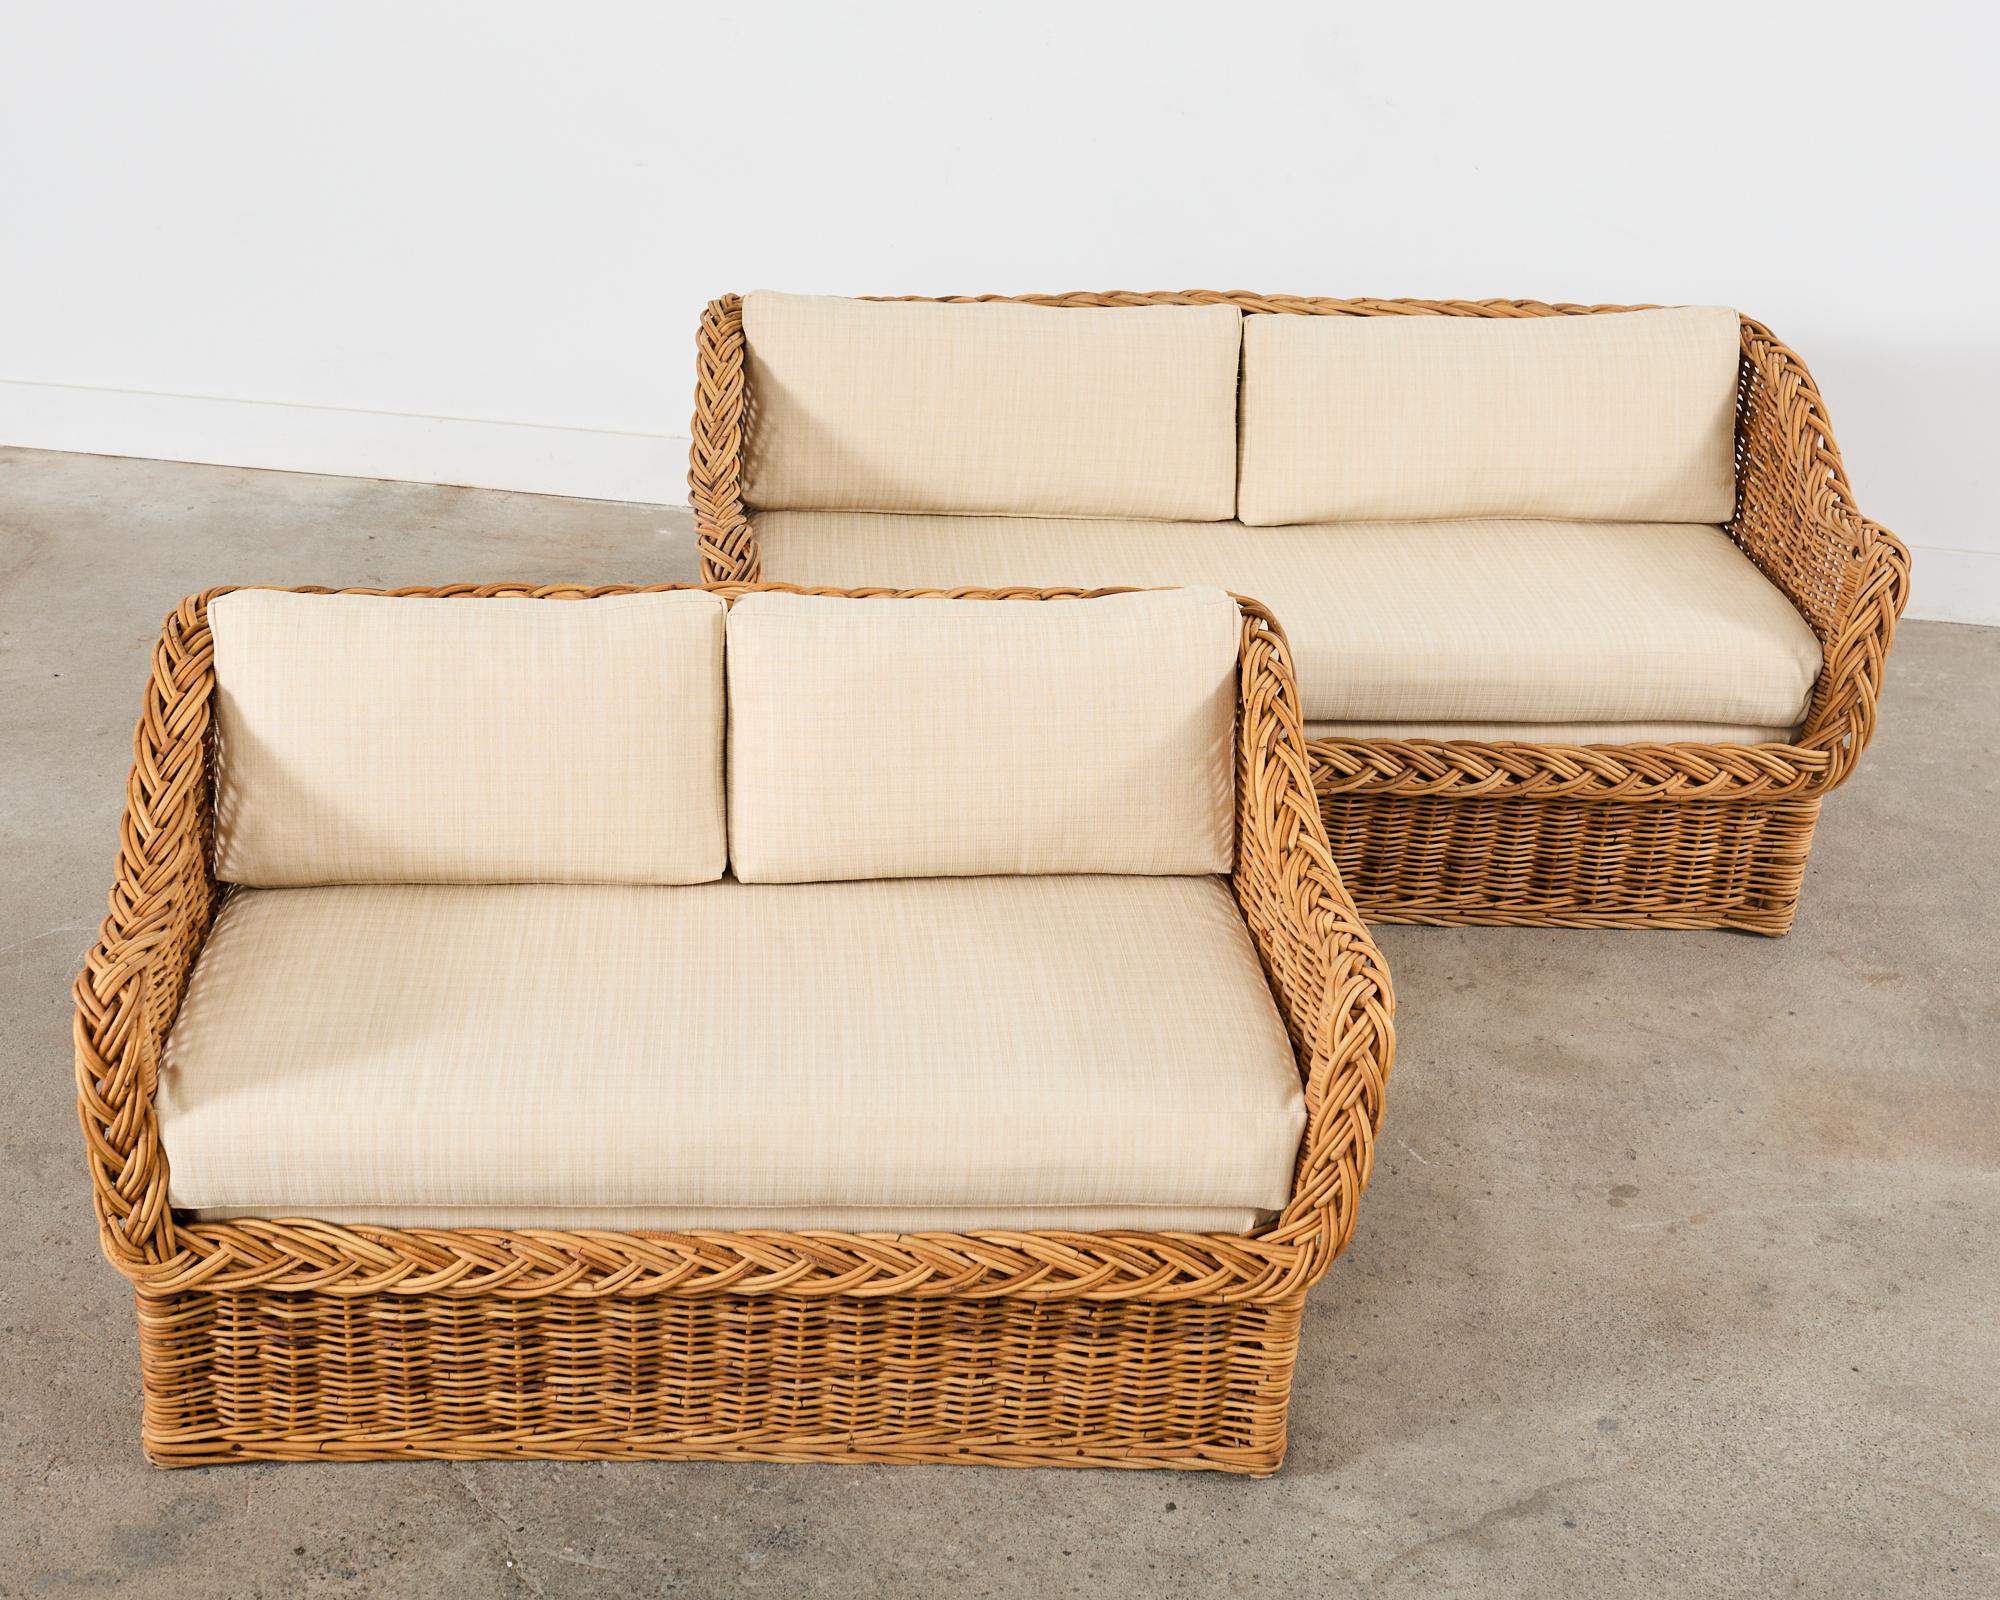 Woven Michael Taylor Style Wicker Rattan Sofa and Settee by Wicker Works For Sale